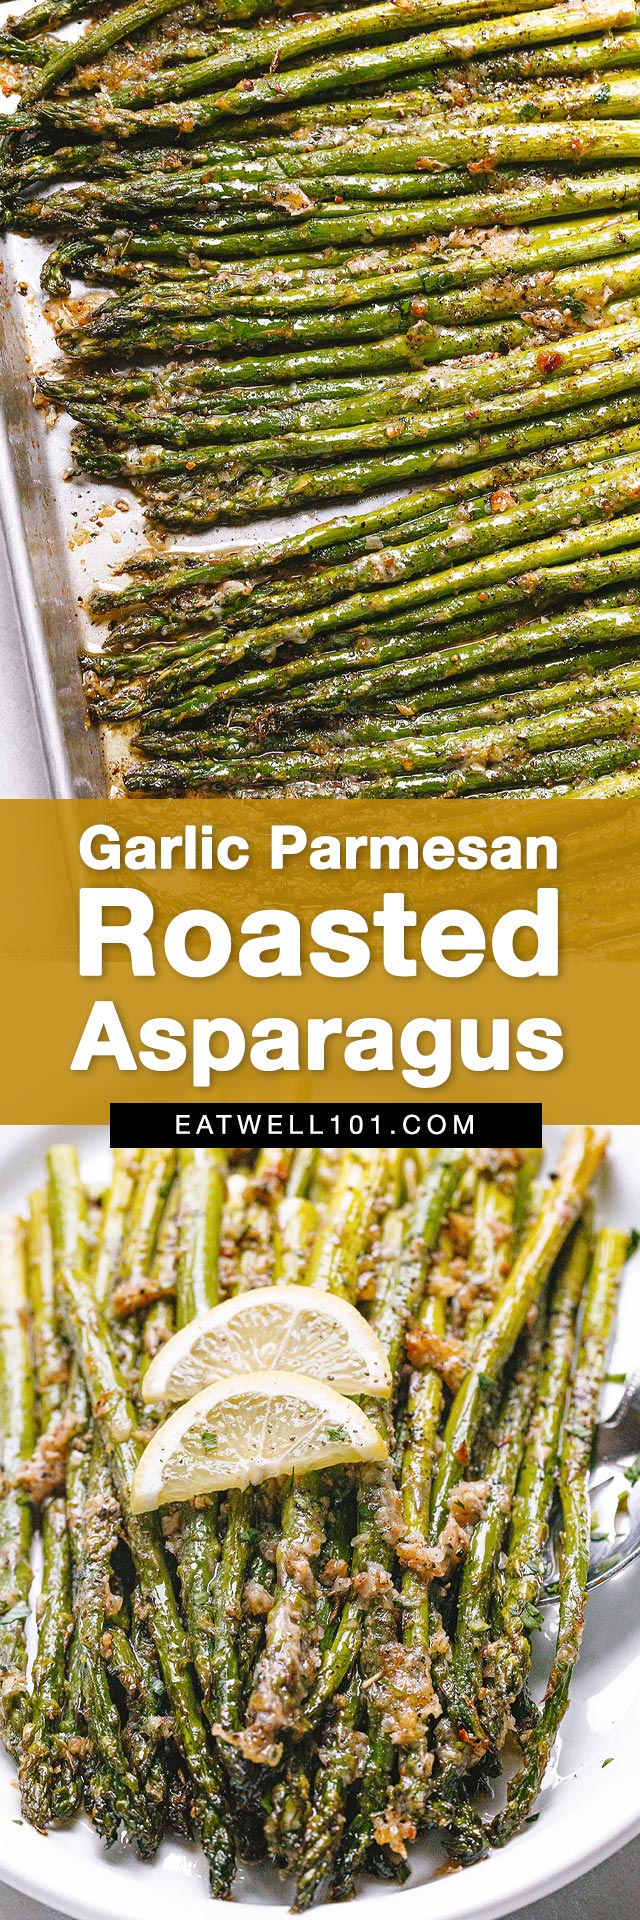 Garlic Parmesan Roasted Asparagus Recipe - #asparagus #recipe #eatwell101 - These epic roasted garlic parmesan asparagus are crispy and golden on the outside, yet tender on the inside.